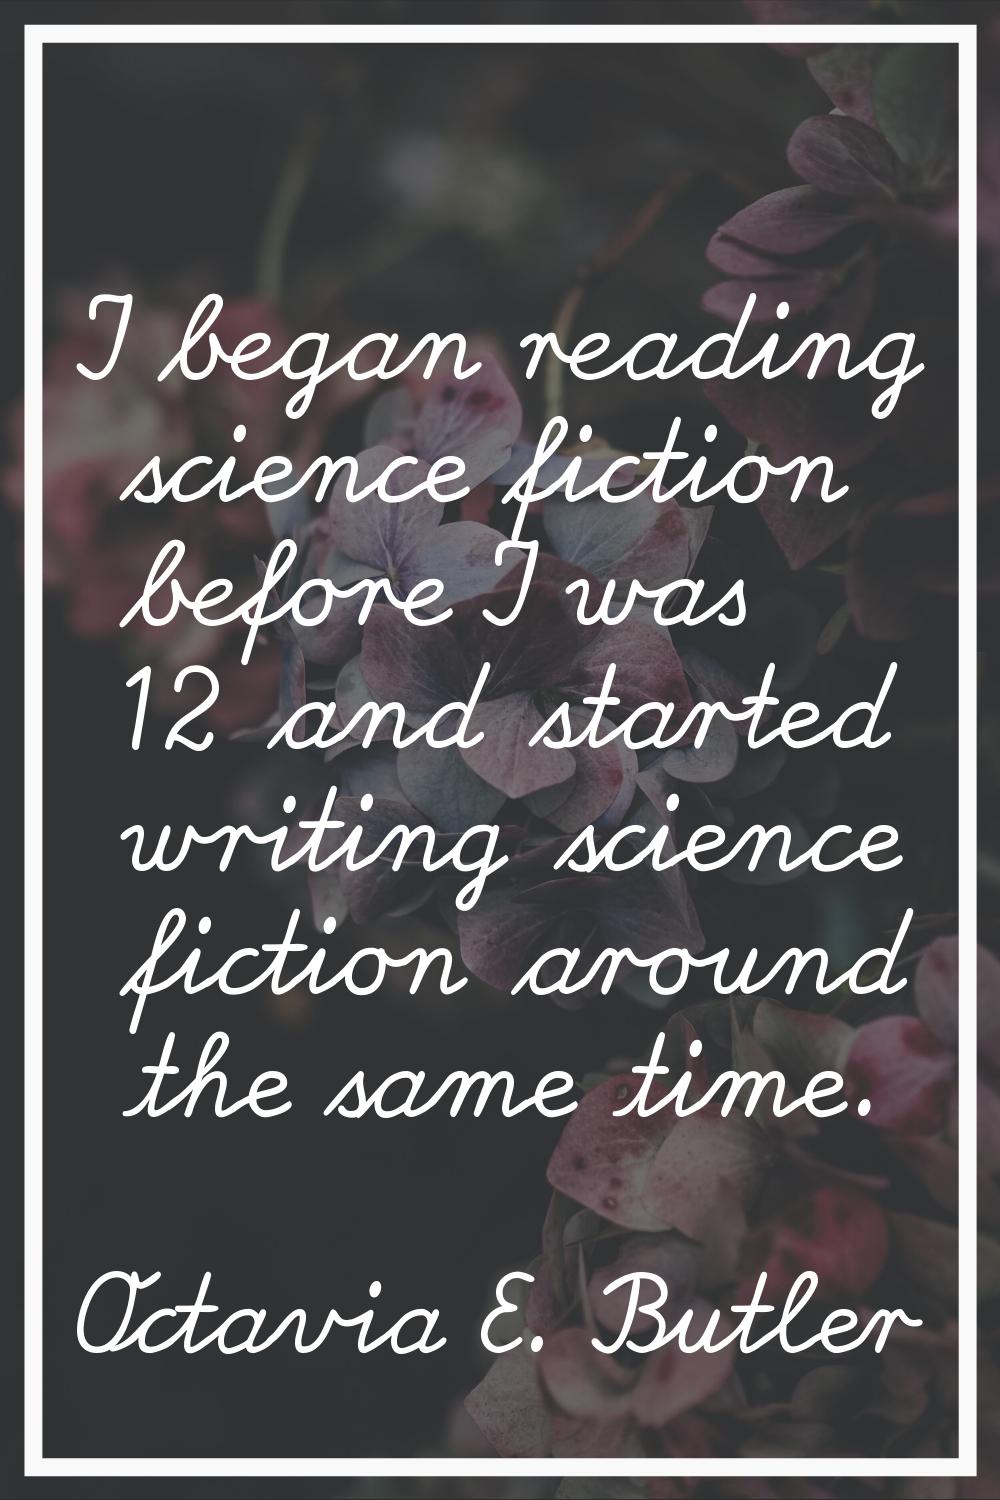 I began reading science fiction before I was 12 and started writing science fiction around the same